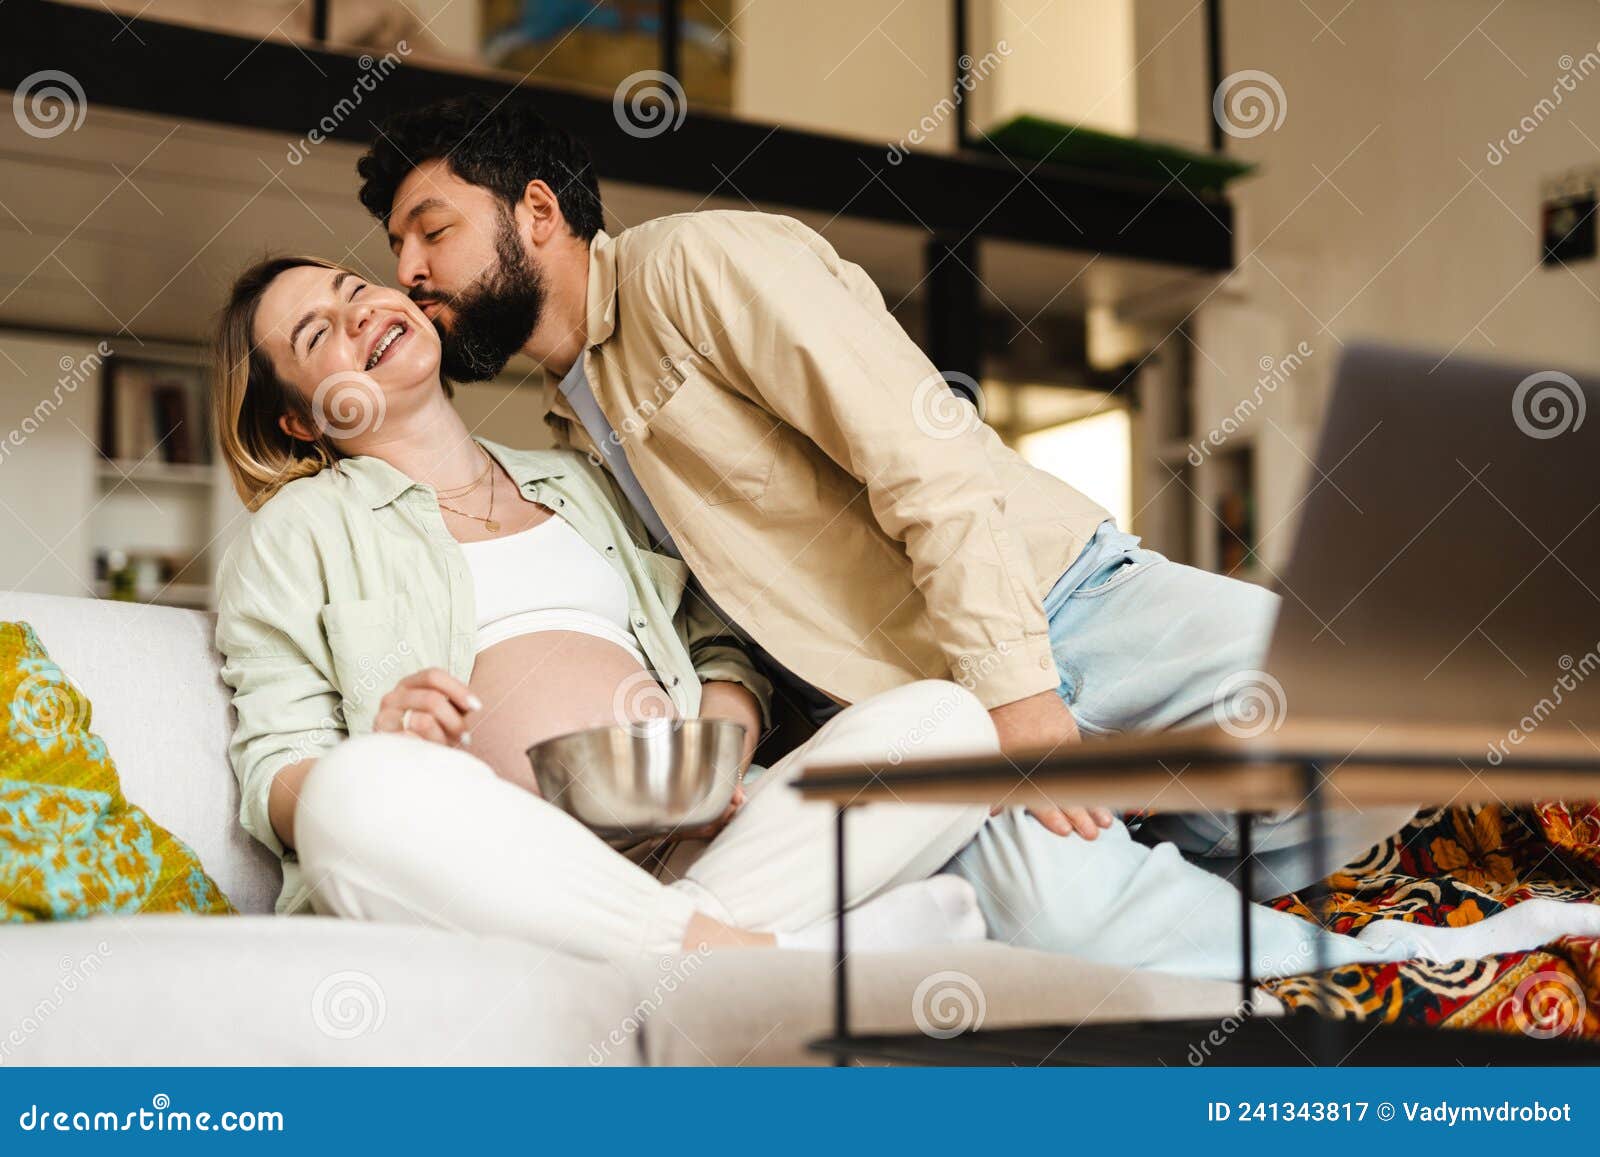 White Man Kissing His Pregnant Woman while Watching Movie on Laptop Stock Image